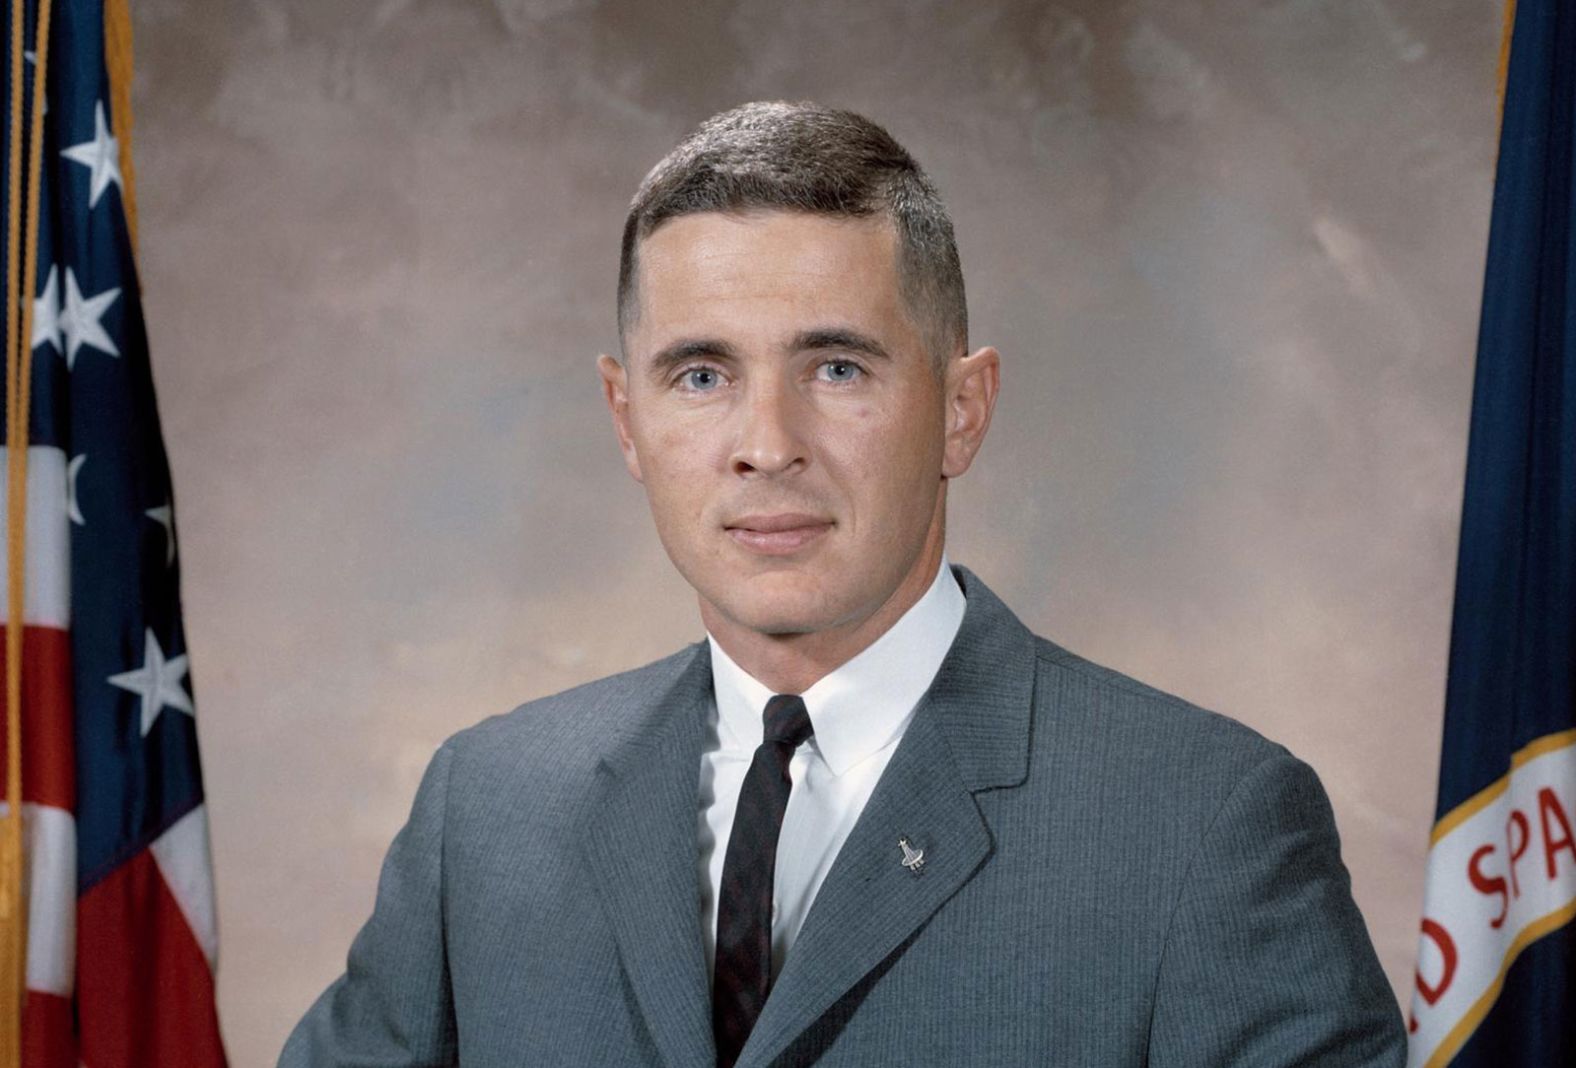 <a href="index.php?page=&url=https%3A%2F%2Fwww.cnn.com%2F2024%2F06%2F07%2Fscience%2Fapollo-8-astronaut-william-anders-reportedly-killed-in-plane-crash%2Findex.html" target="_blank">William Anders</a>, a NASA astronaut who was one of the first three people to orbit the moon, died in a plane crash in Washington state, his son confirmed on Friday, June 7. He was 90.